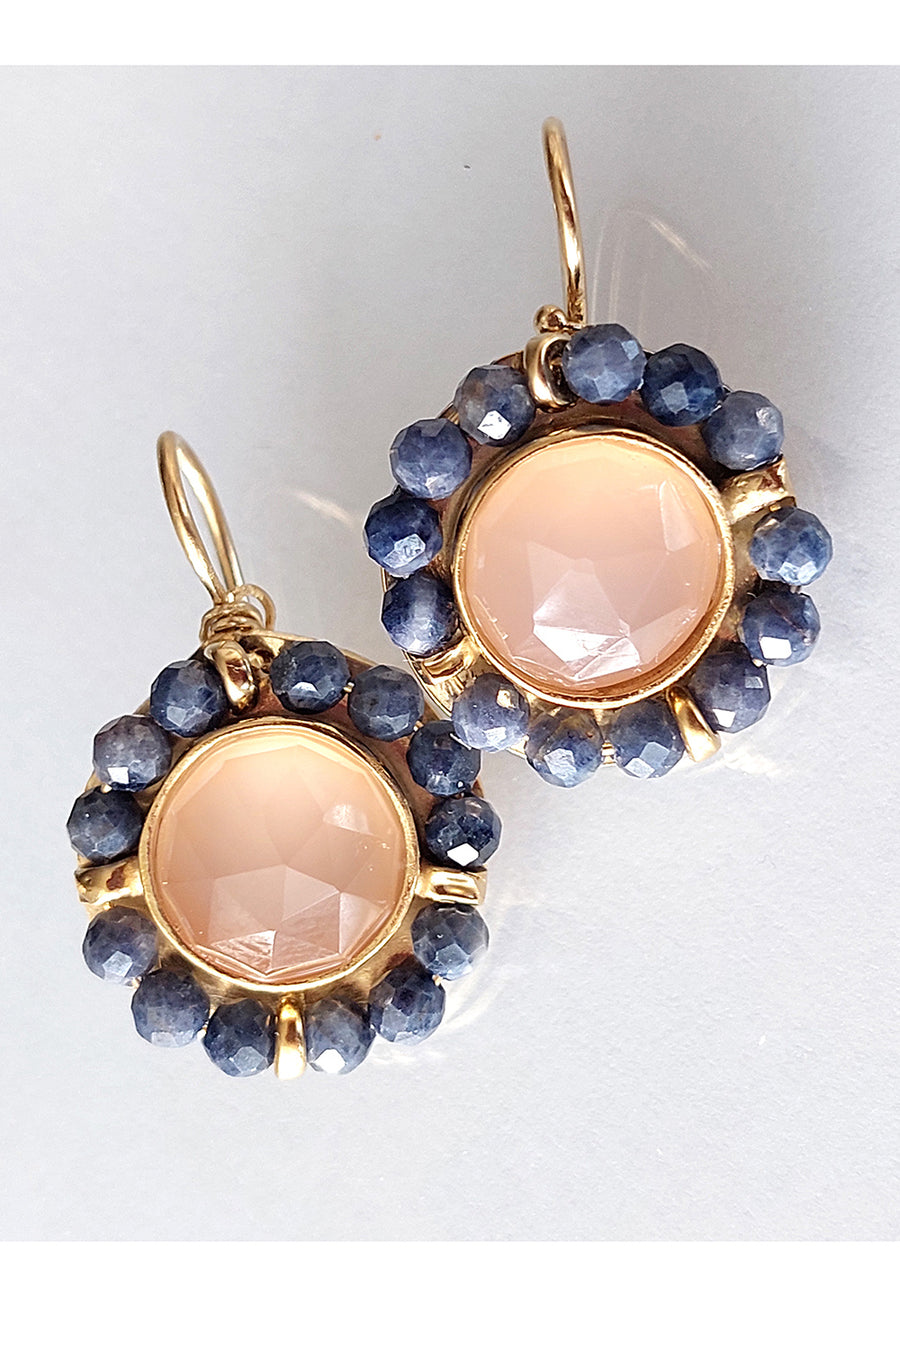 Sapphire and Chalcedony Goldfilled Earrings